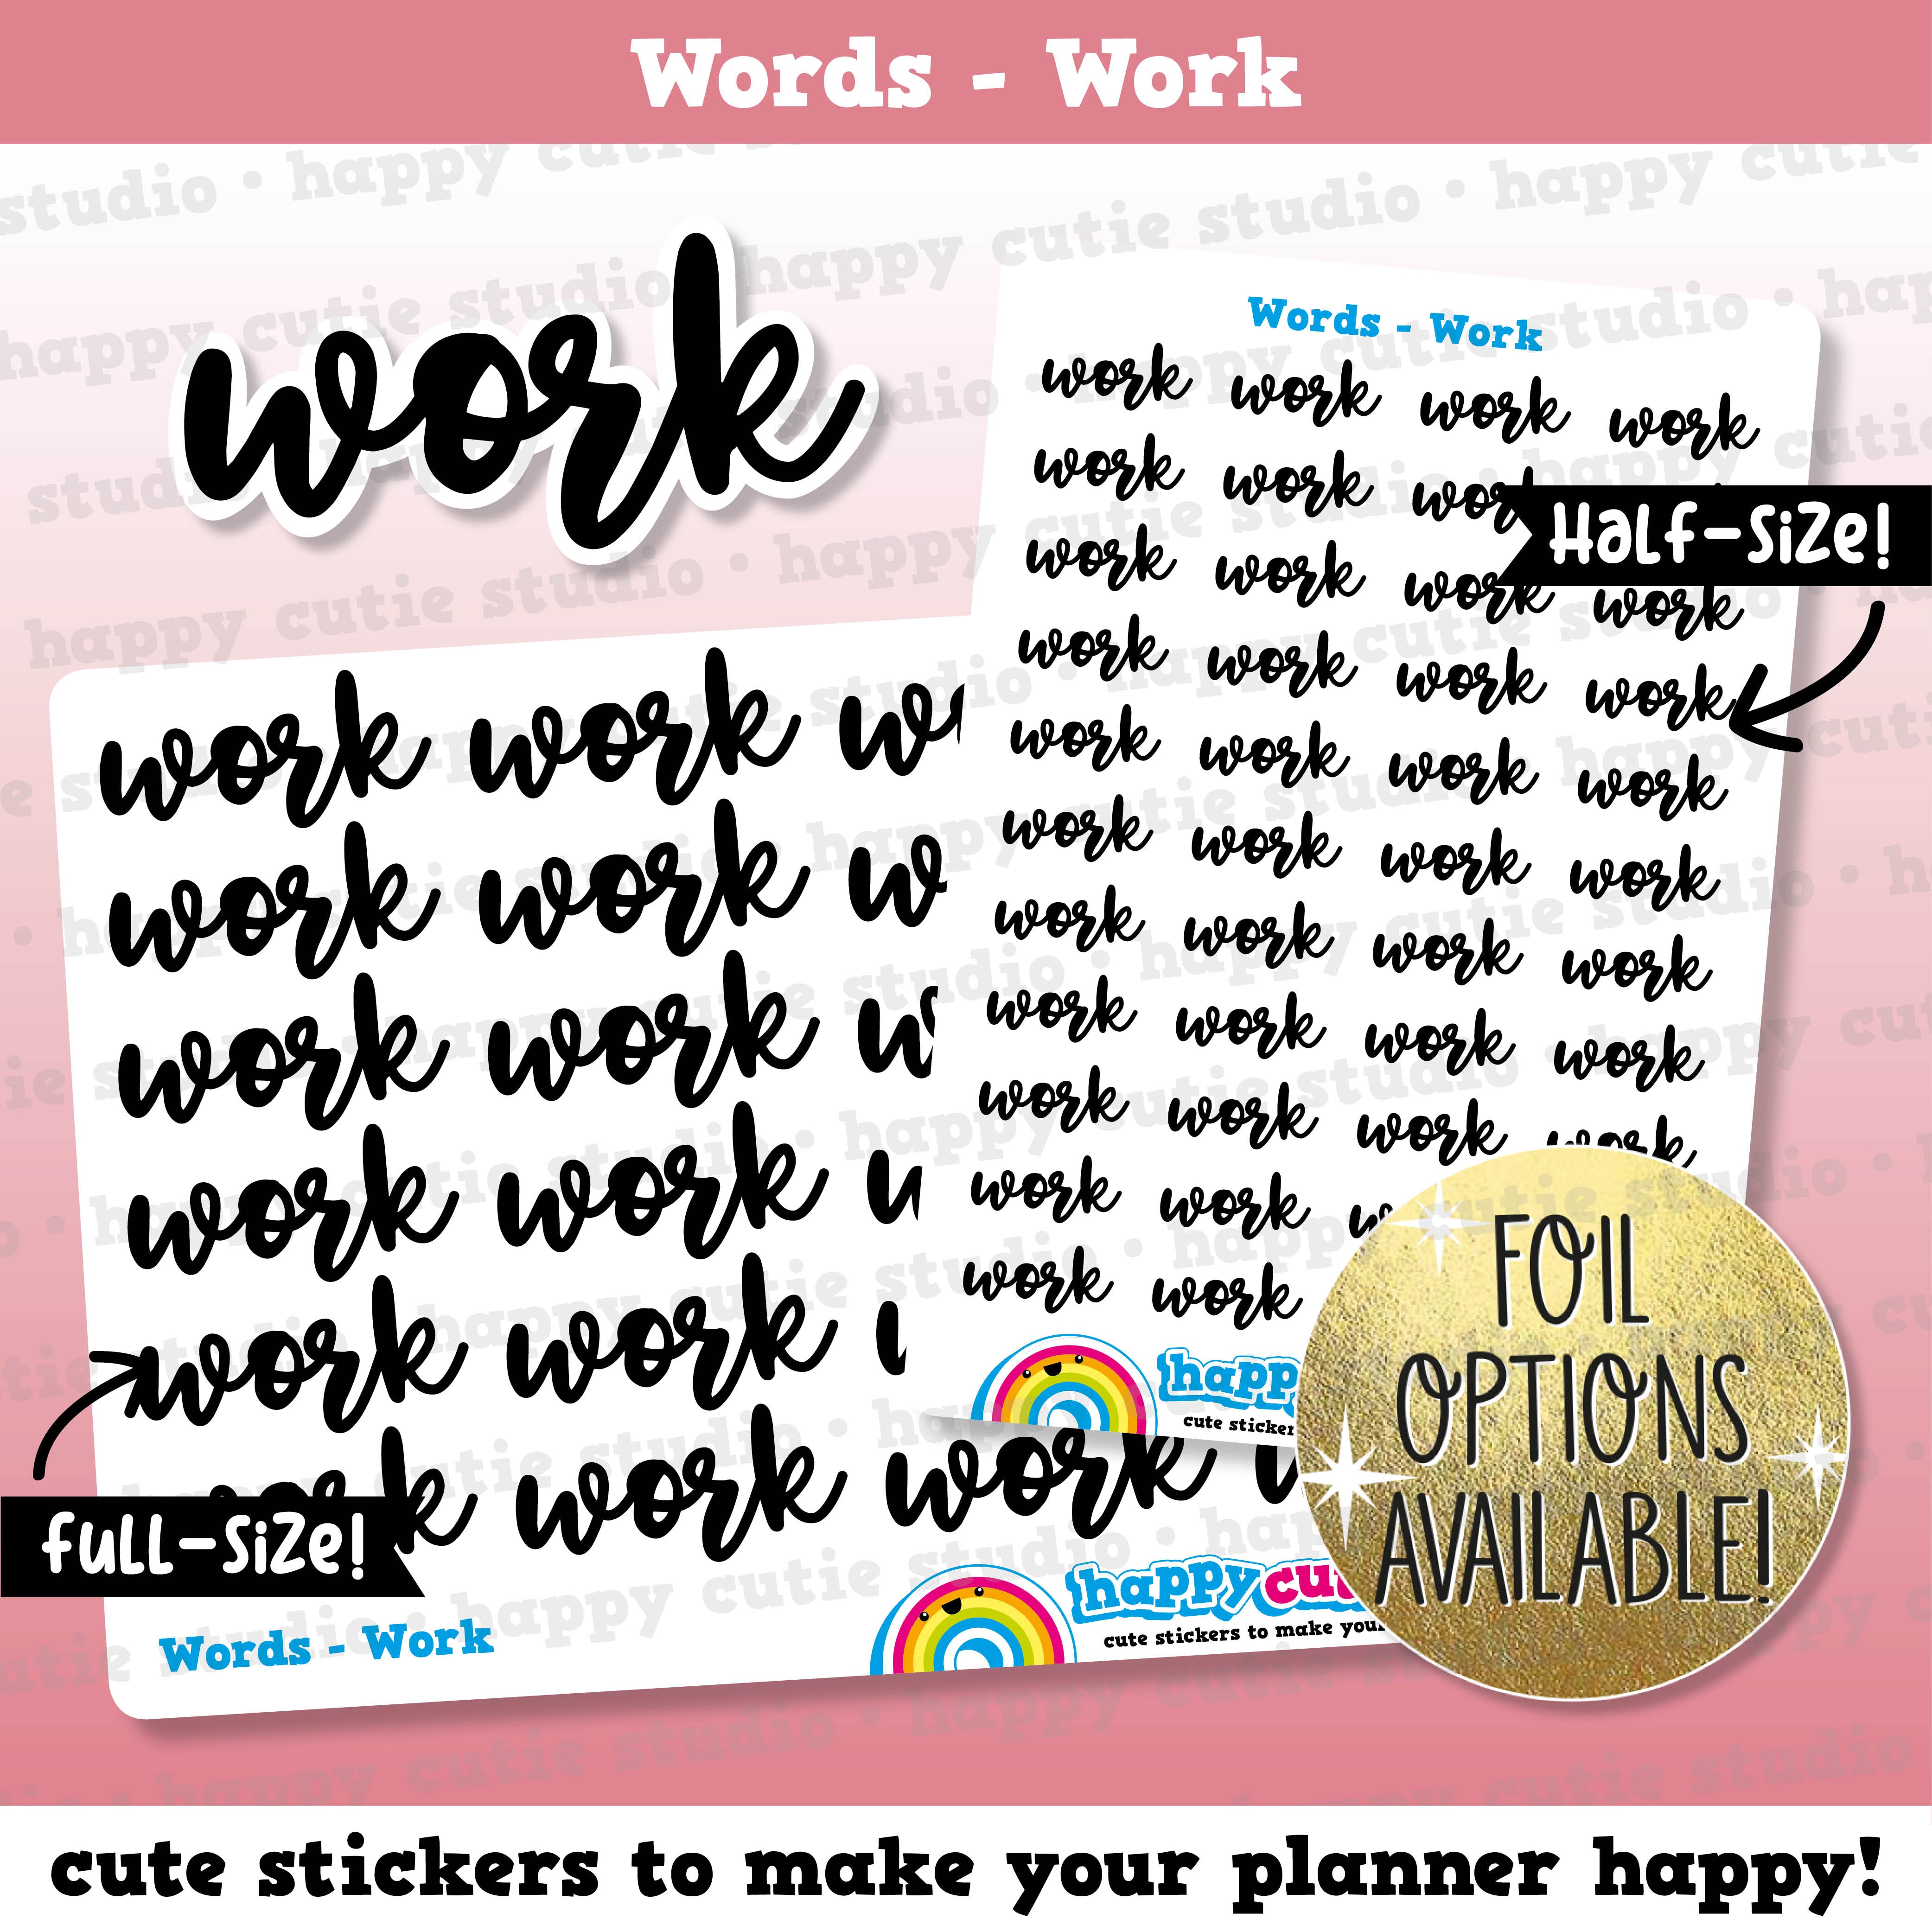 Work Words/Functional/Foil Planner Stickers